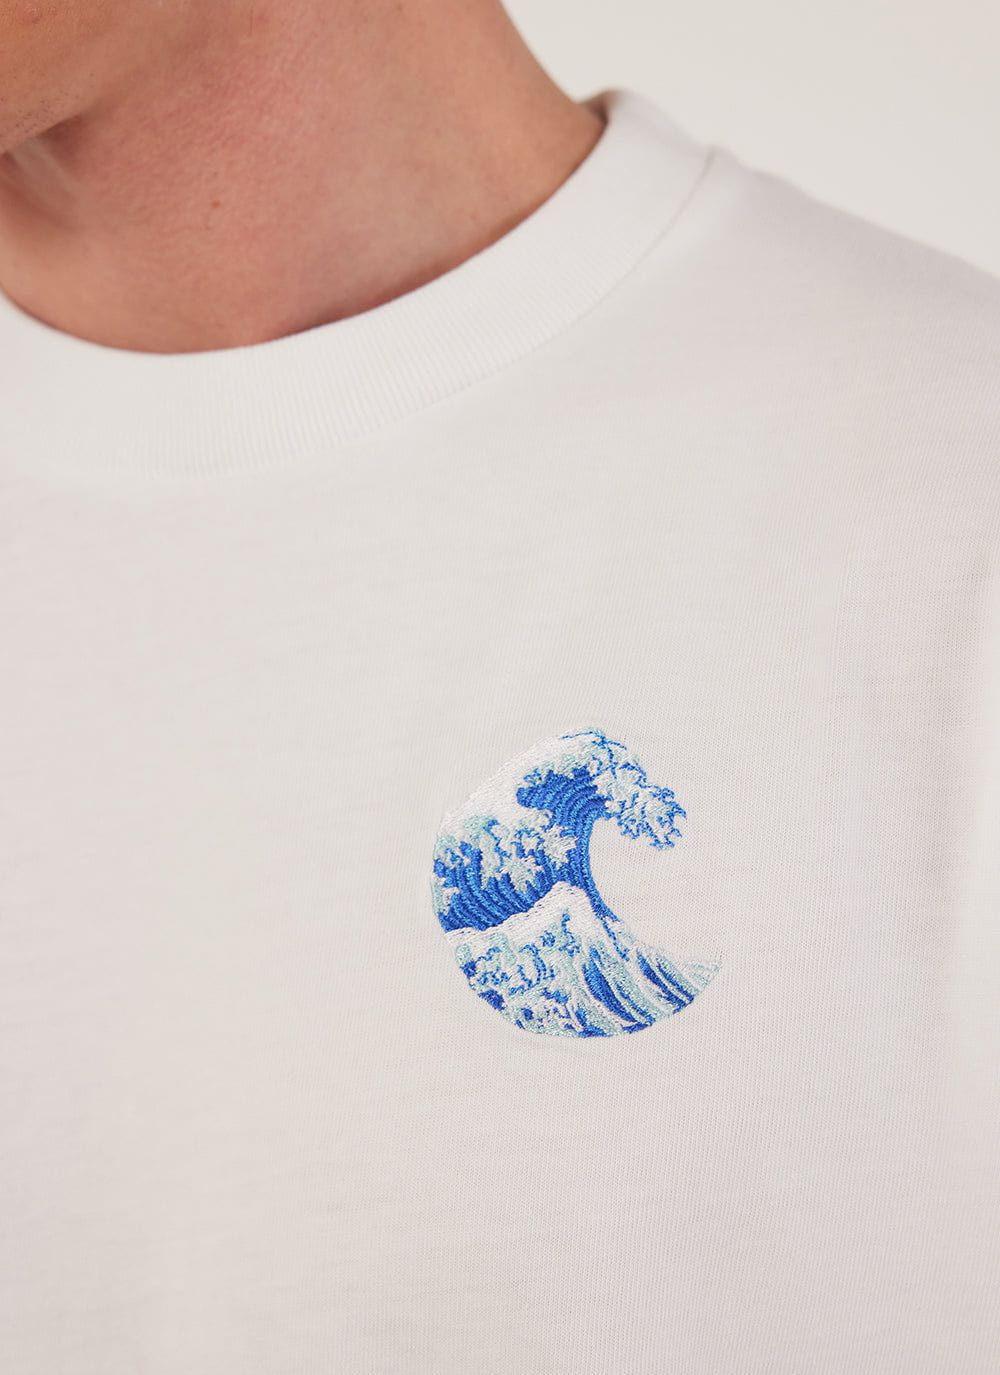 Percival Wave Embroidered White T-shirt